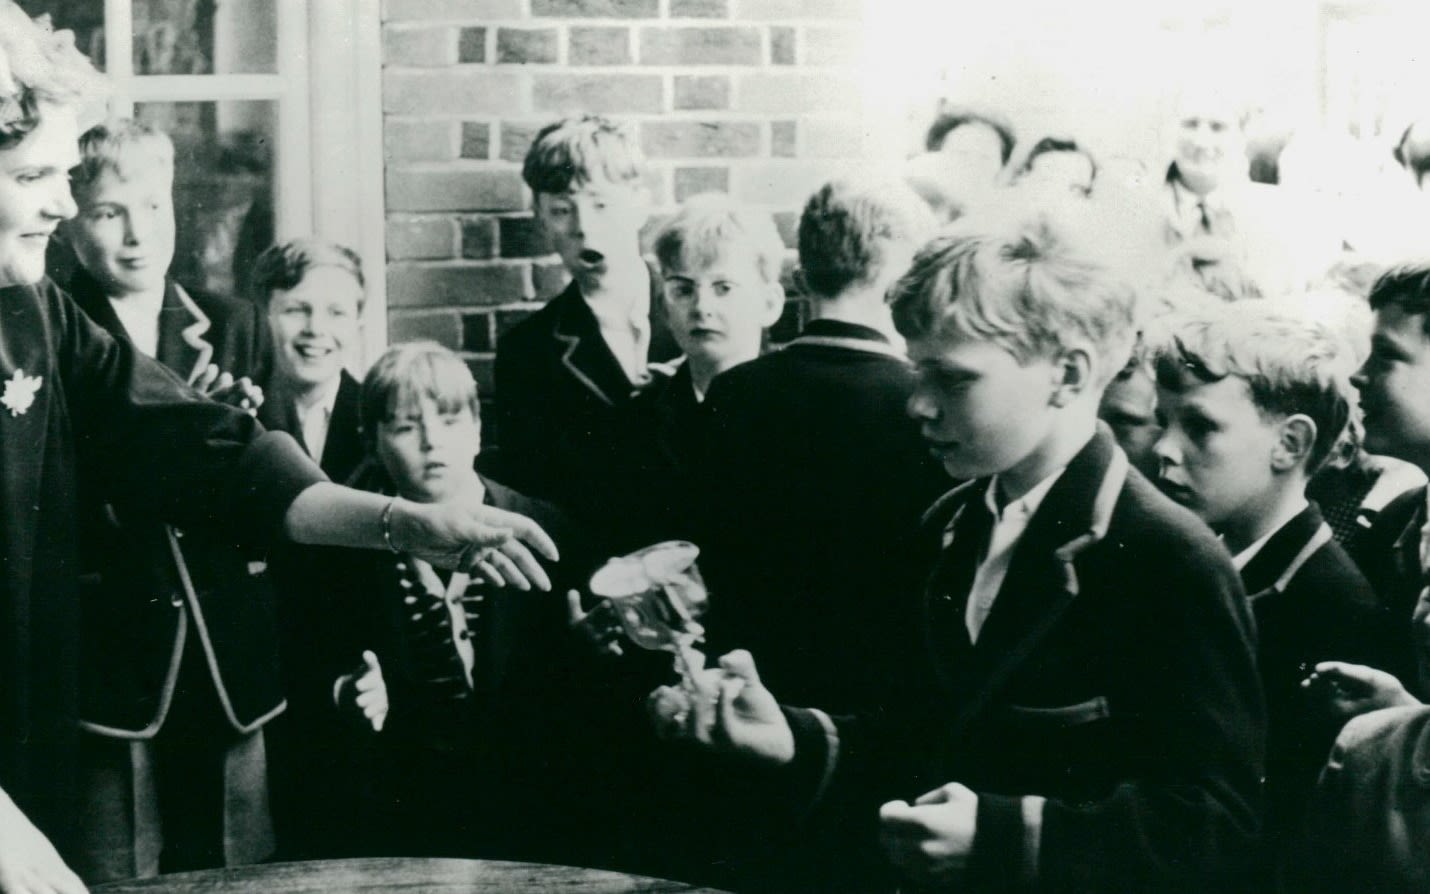 A young Richard Branson at school holding a small trophy